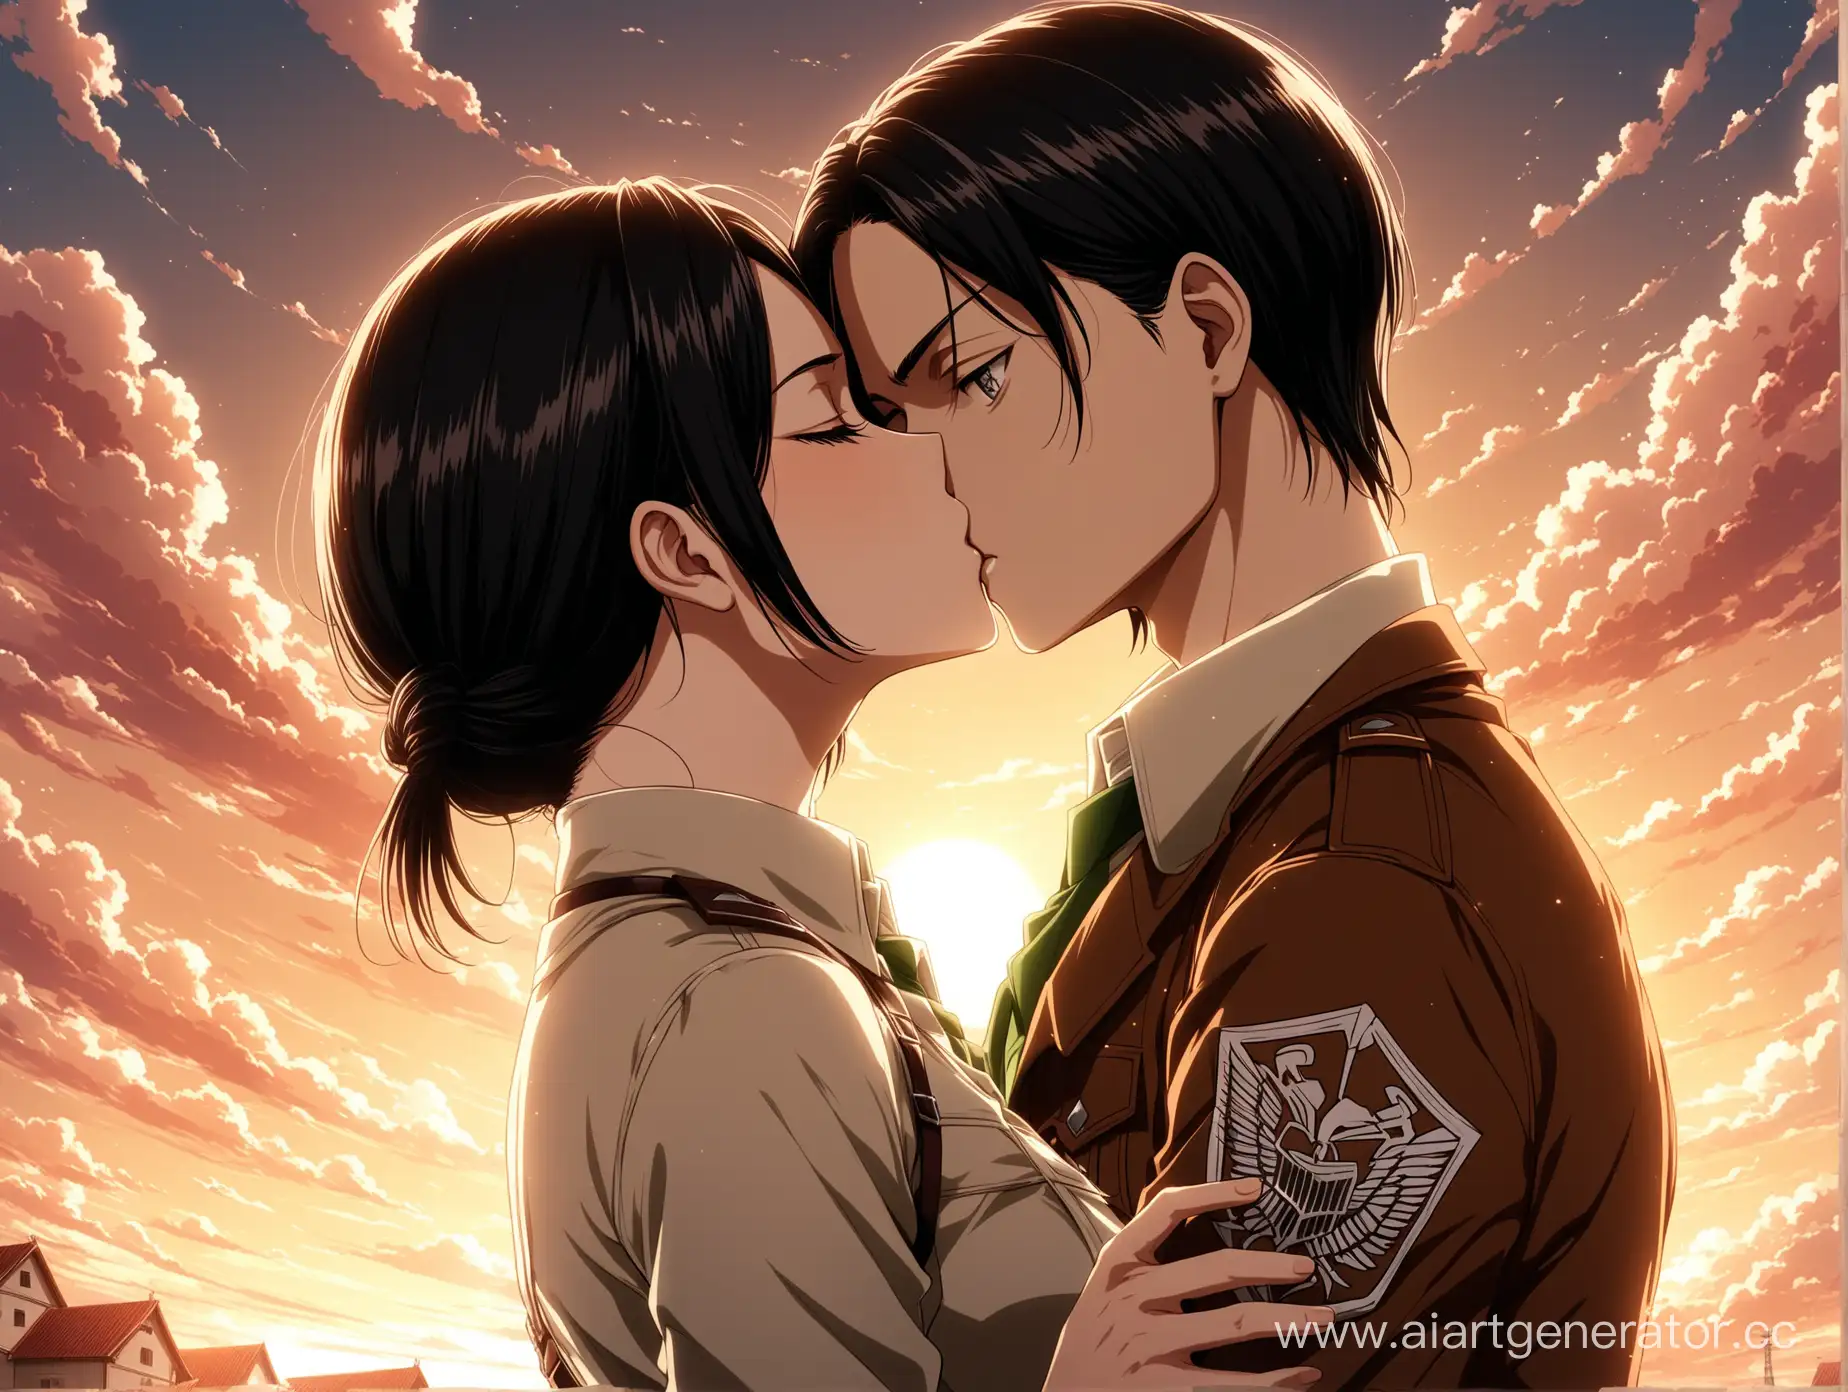 Levi-Ackerman-and-Lina-Braun-A-Romantic-Embrace-in-the-World-of-Attack-on-Titan